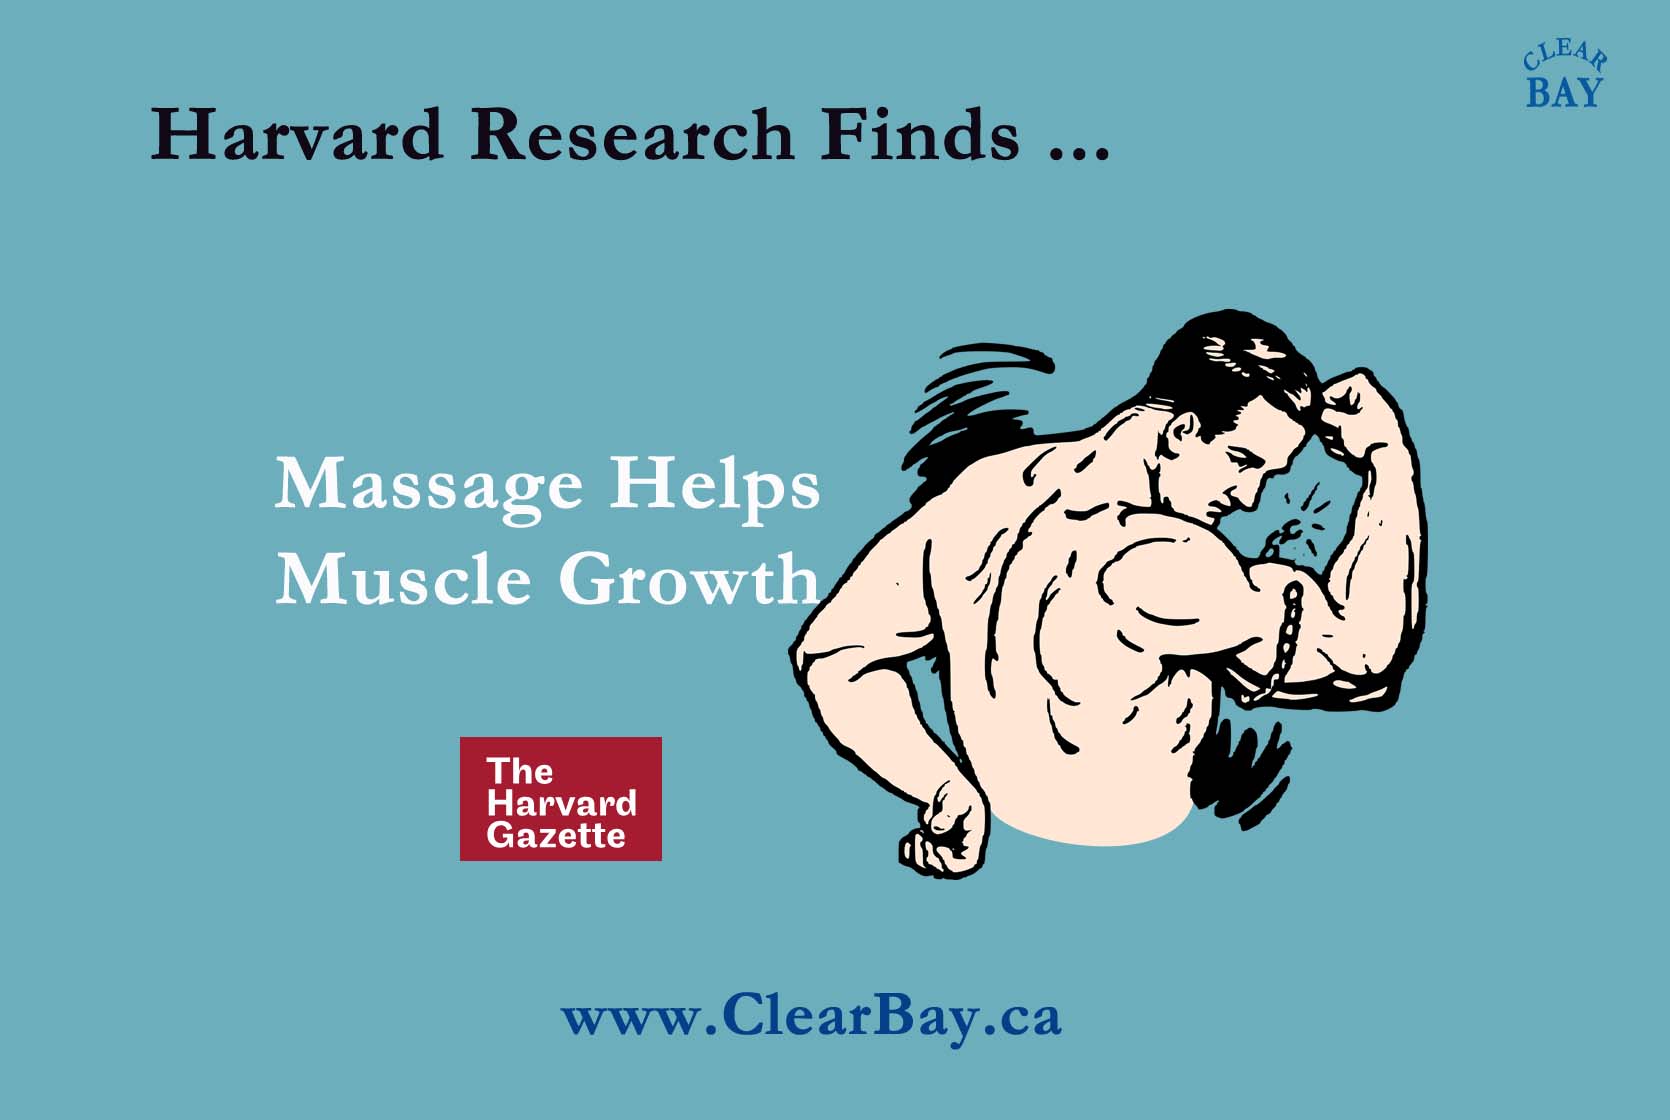 Massage Helps Muscle Growth